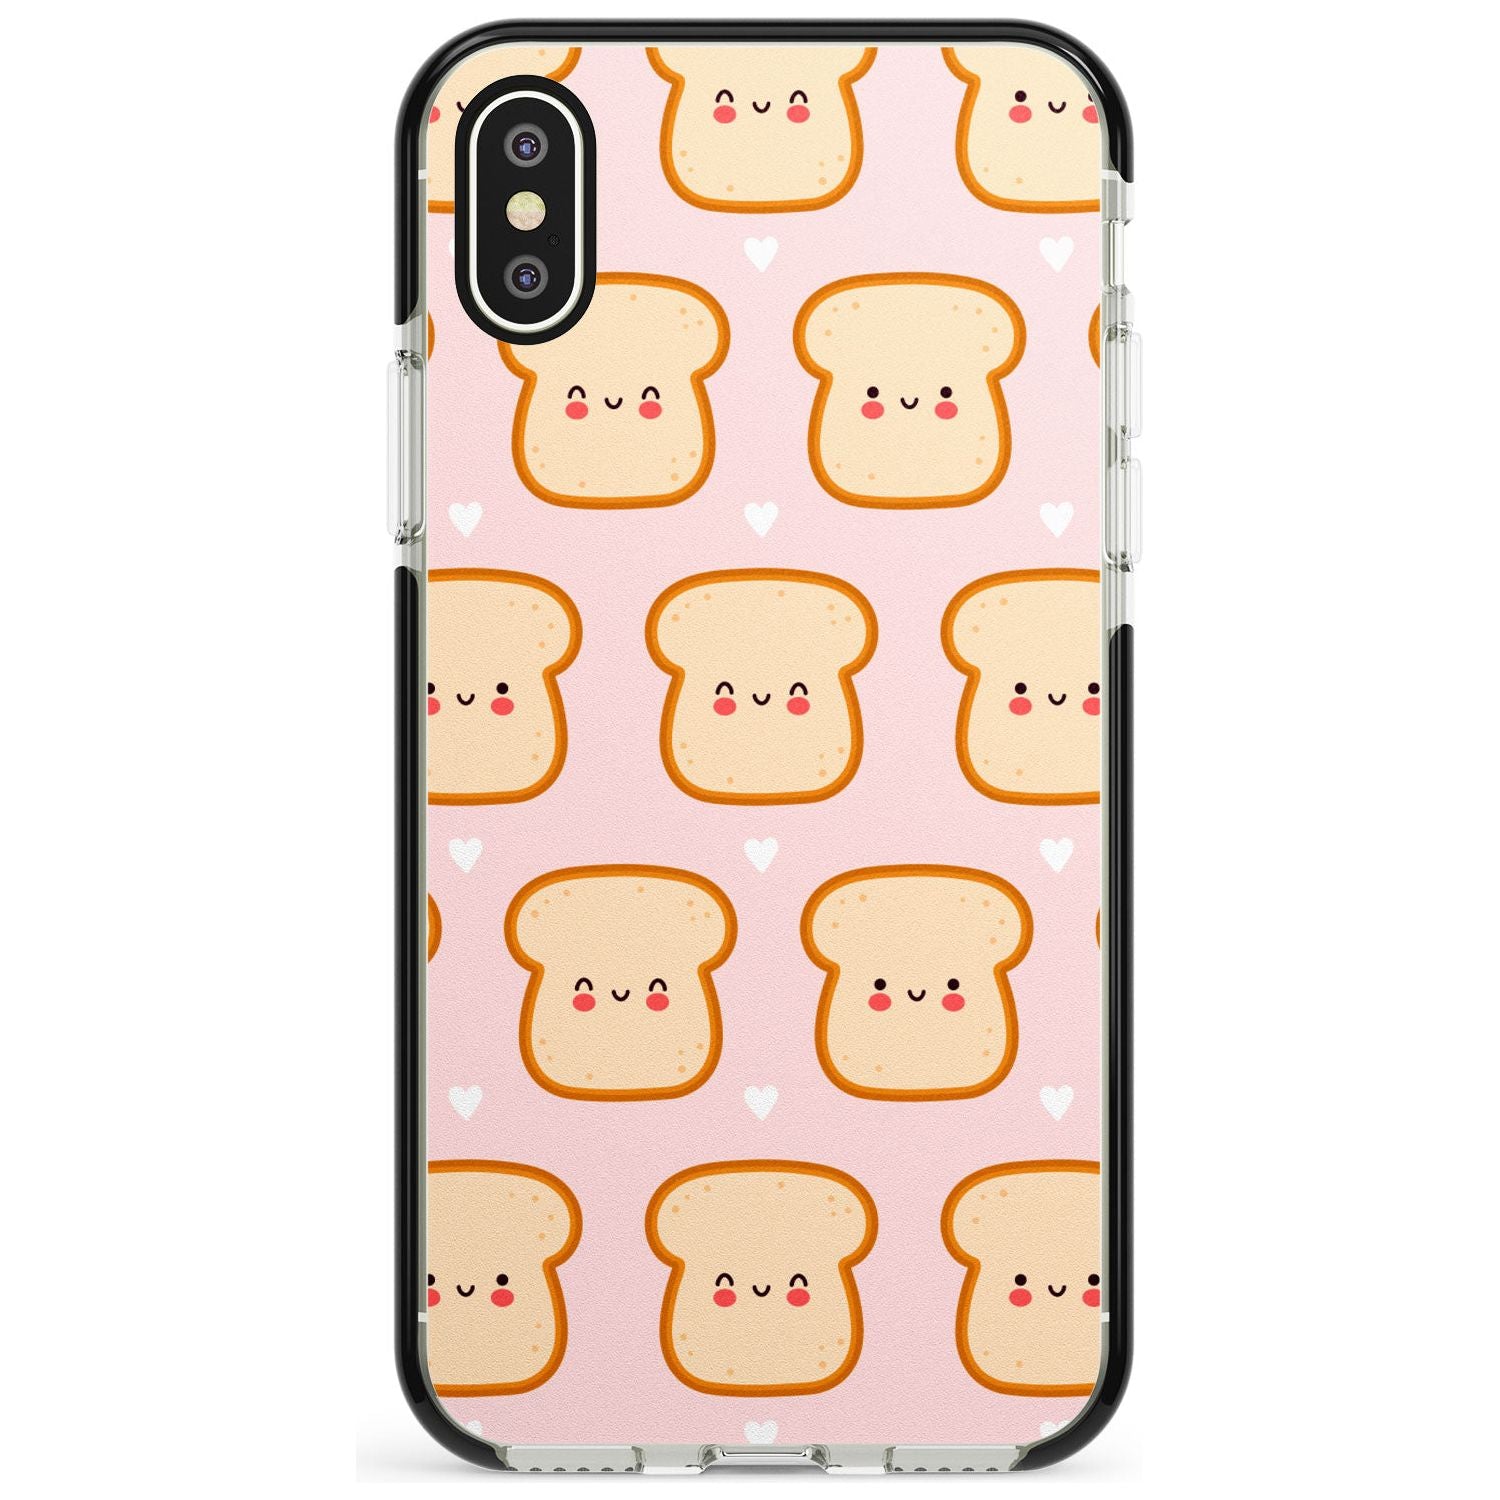 Bread Faces Kawaii Pattern Black Impact Phone Case for iPhone X XS Max XR